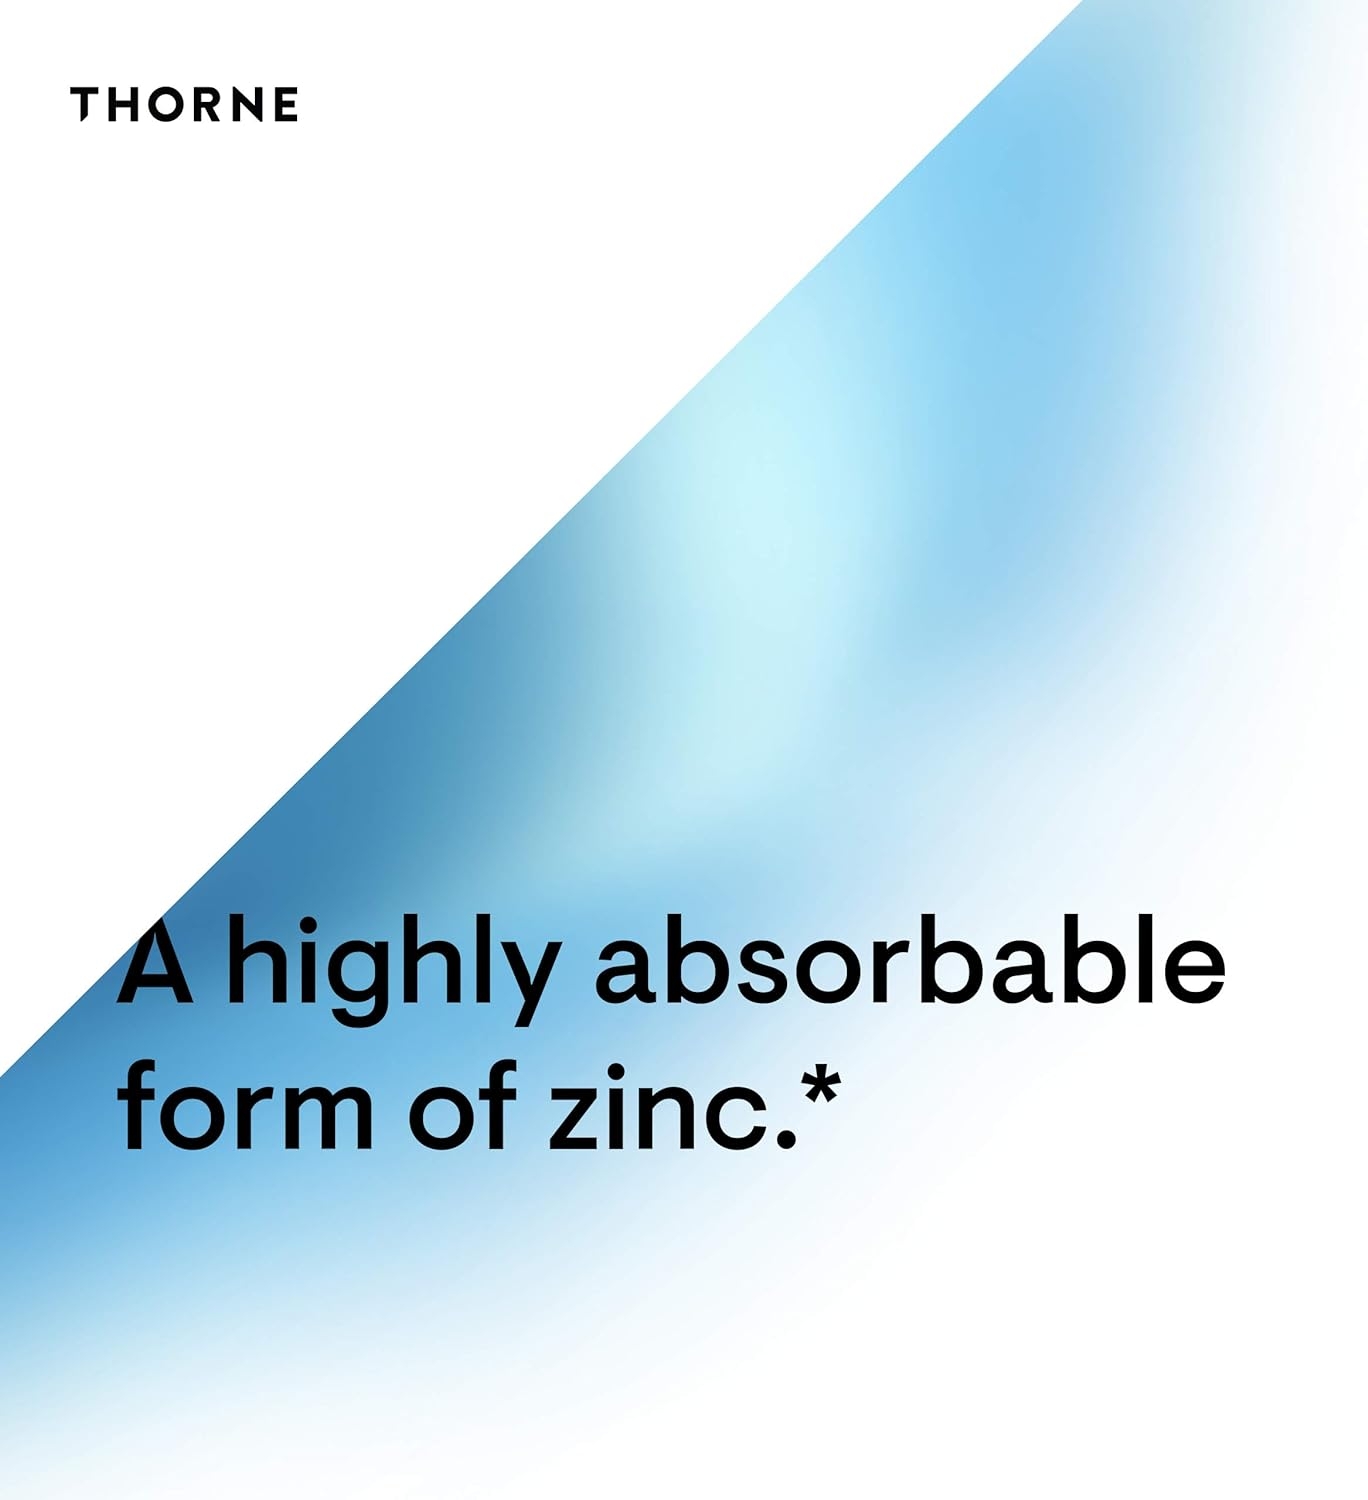 Thorne Research - Zinc Picolinate 30 mg - Well-Absorbed Zinc Supplement for Growth and Immune Function - 60 Capsules